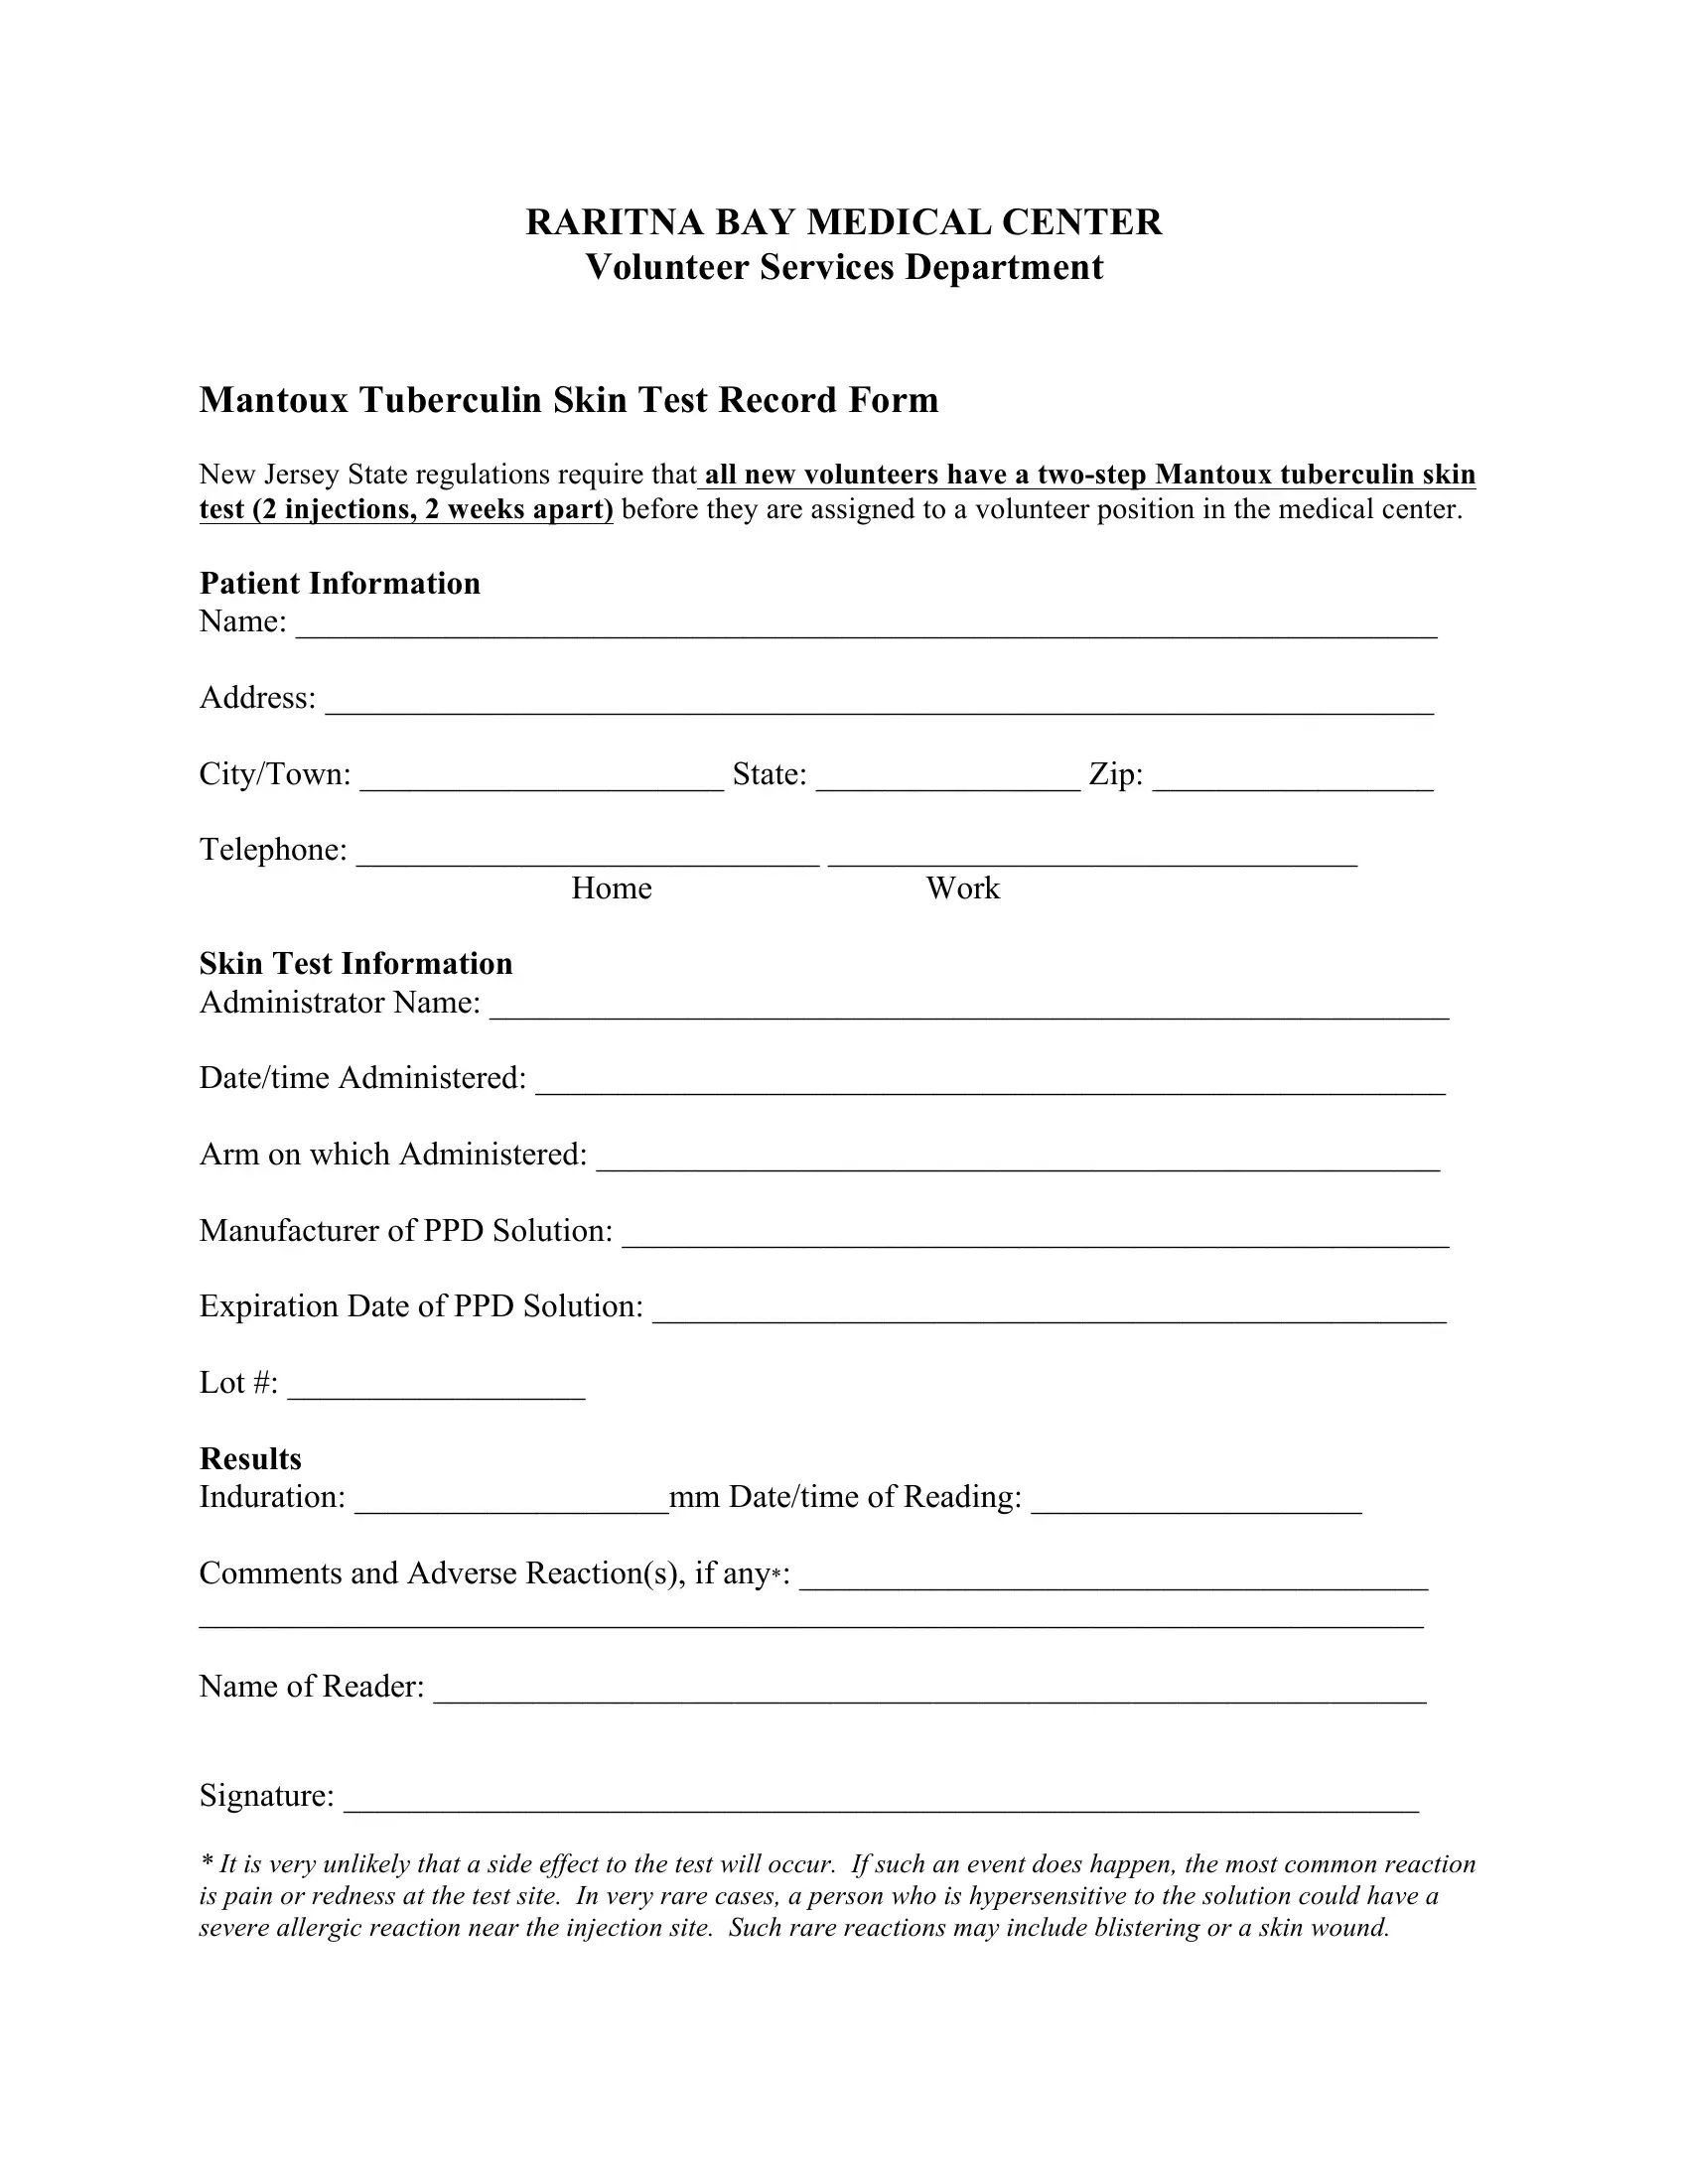 care-providers-pdf-forms-fillable-and-printable